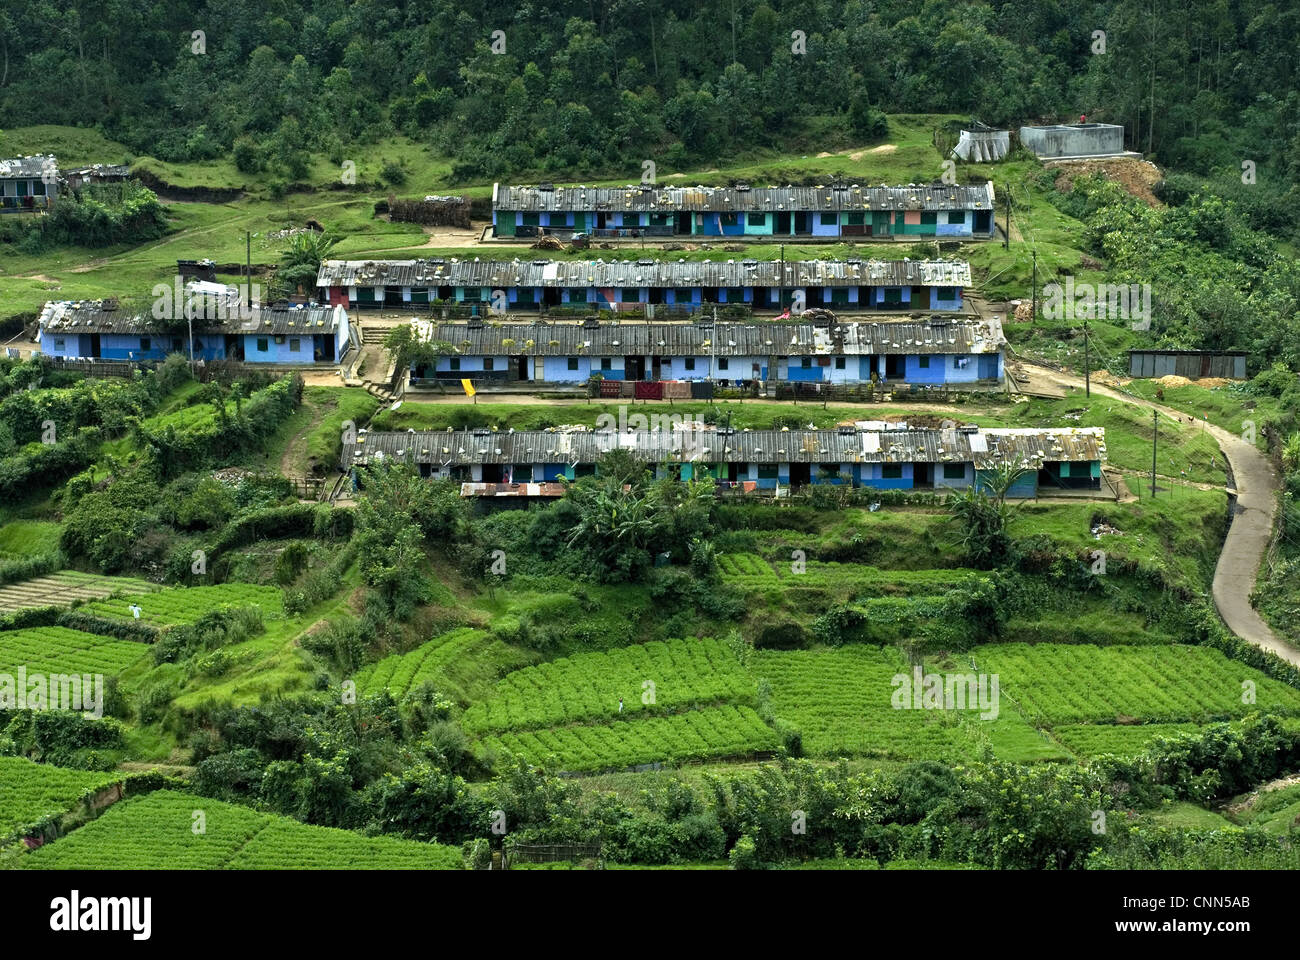 View of tea plantation workers housing on hillside, Munnar, Western Ghats, Kerala, India Stock Photo